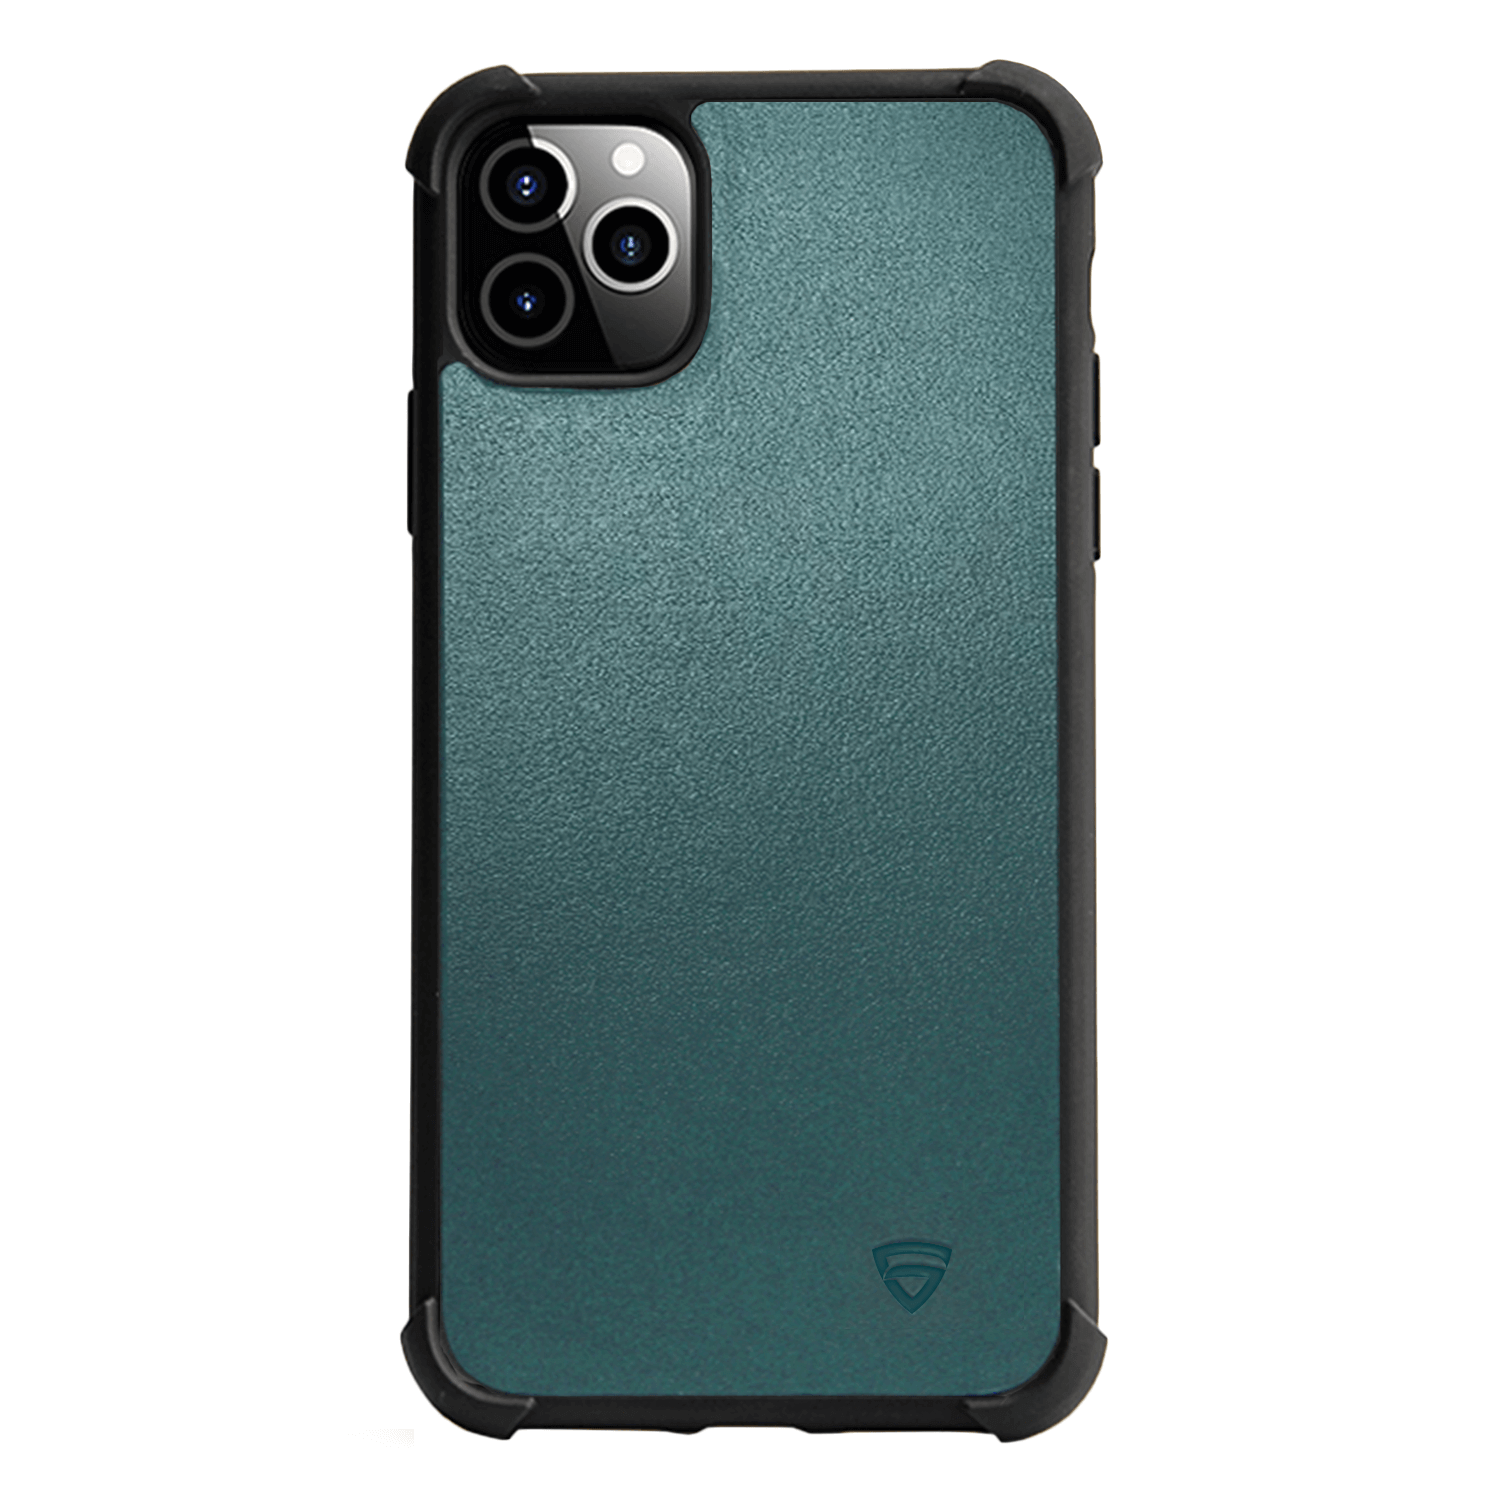 RAEGR iPhone 11 Pro Max Elements Armor Protective Case/Cover with Genuine Leather